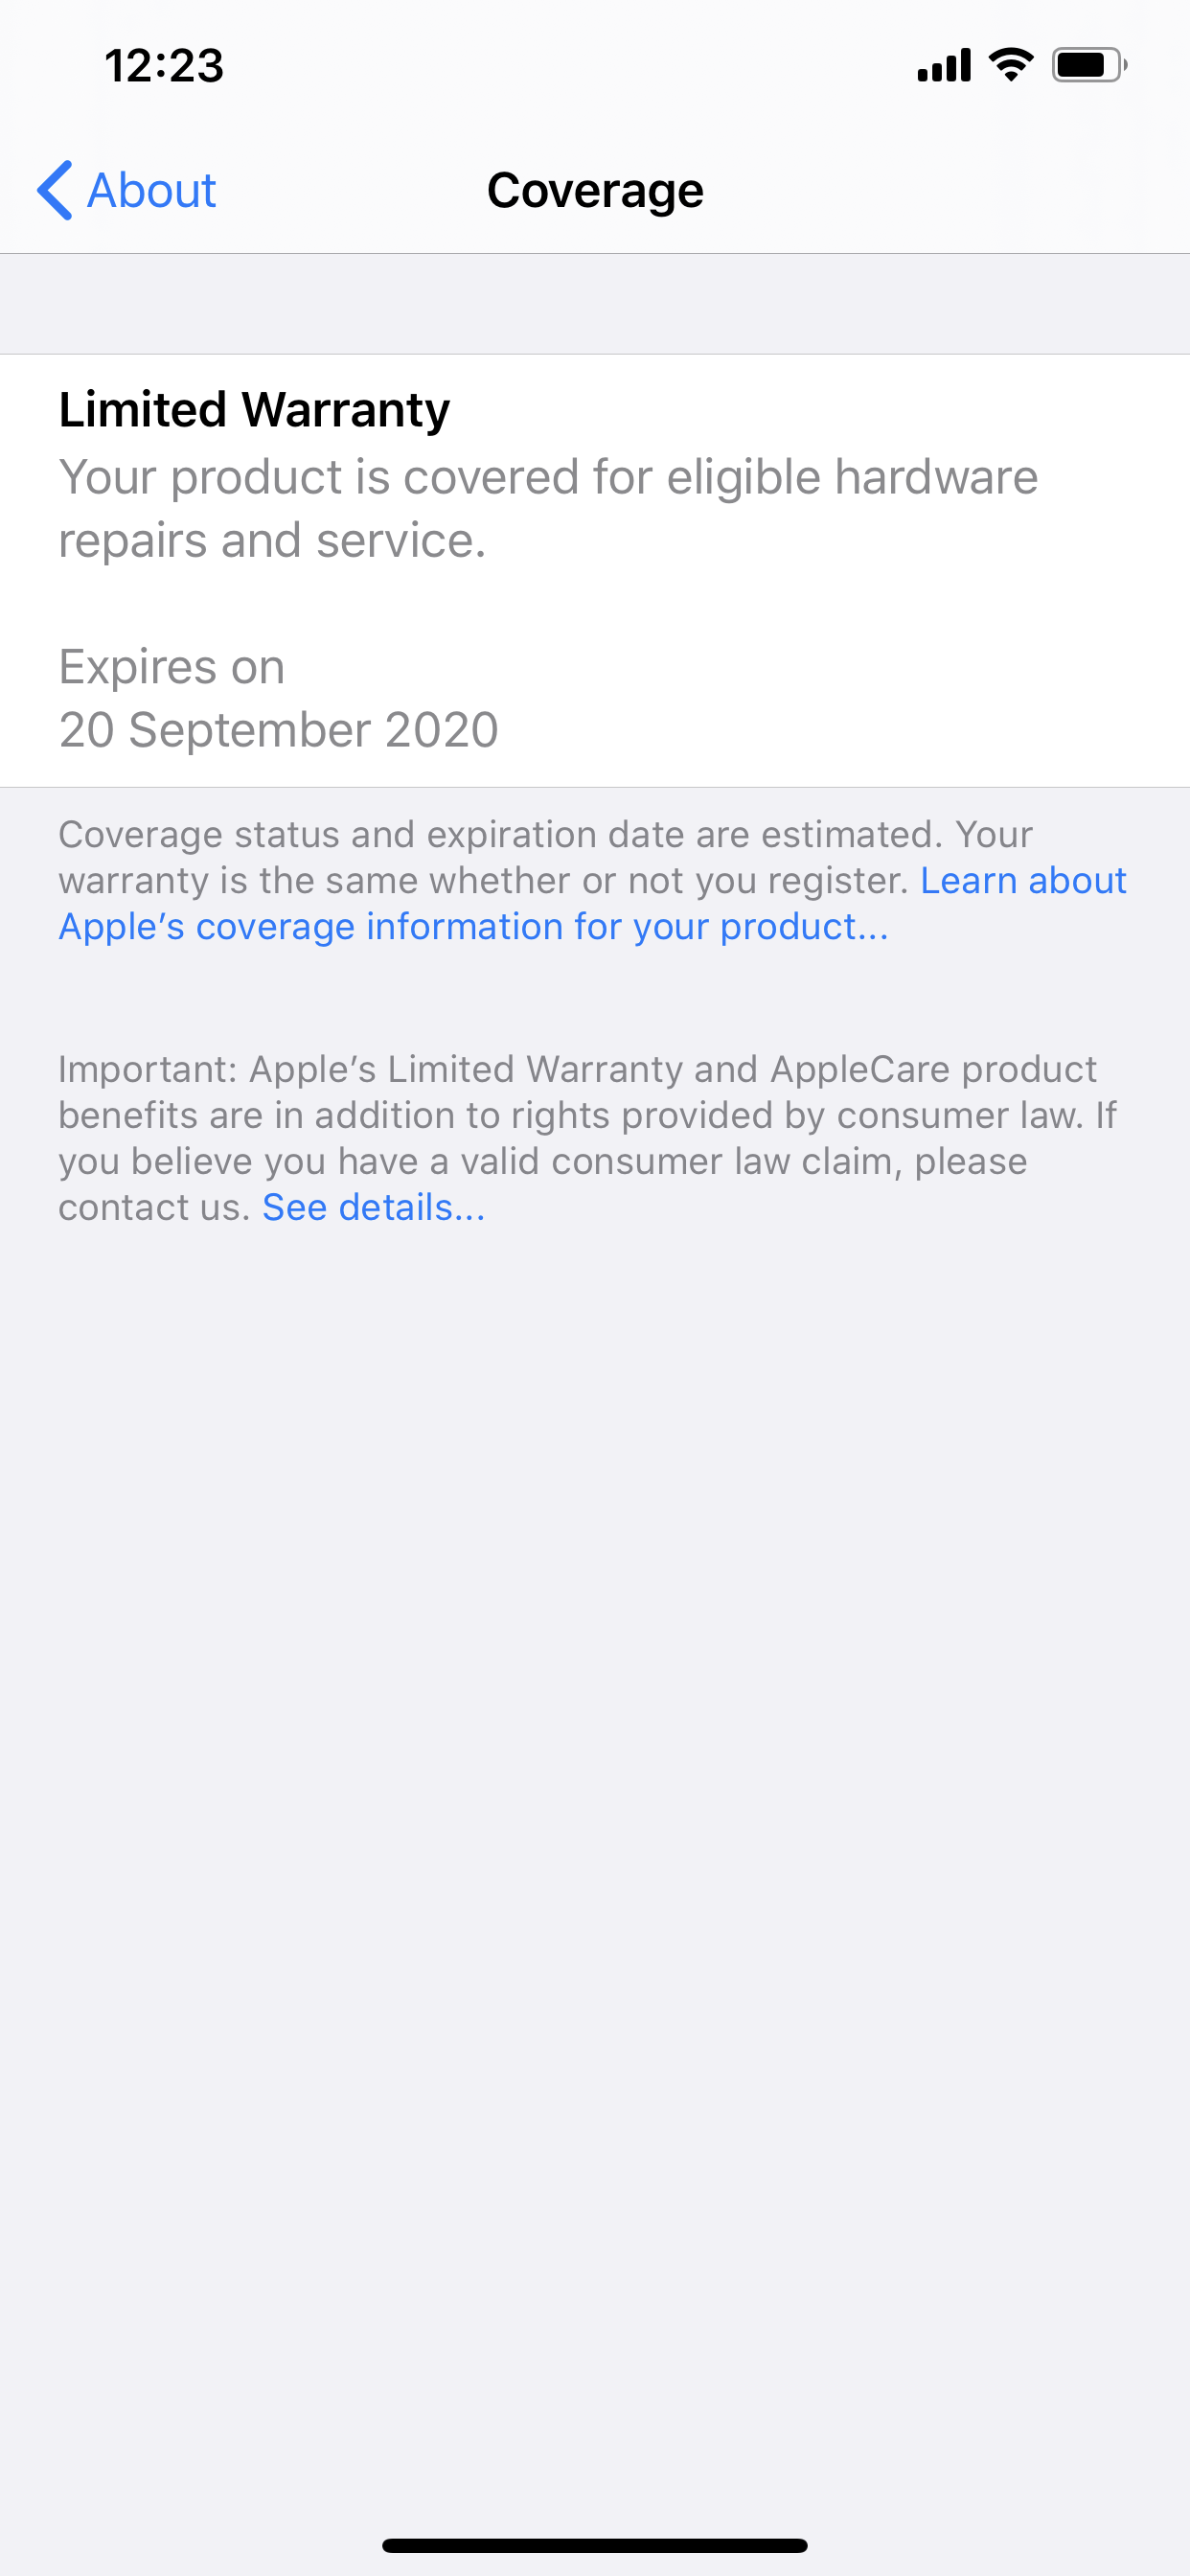 can i buy applecare after